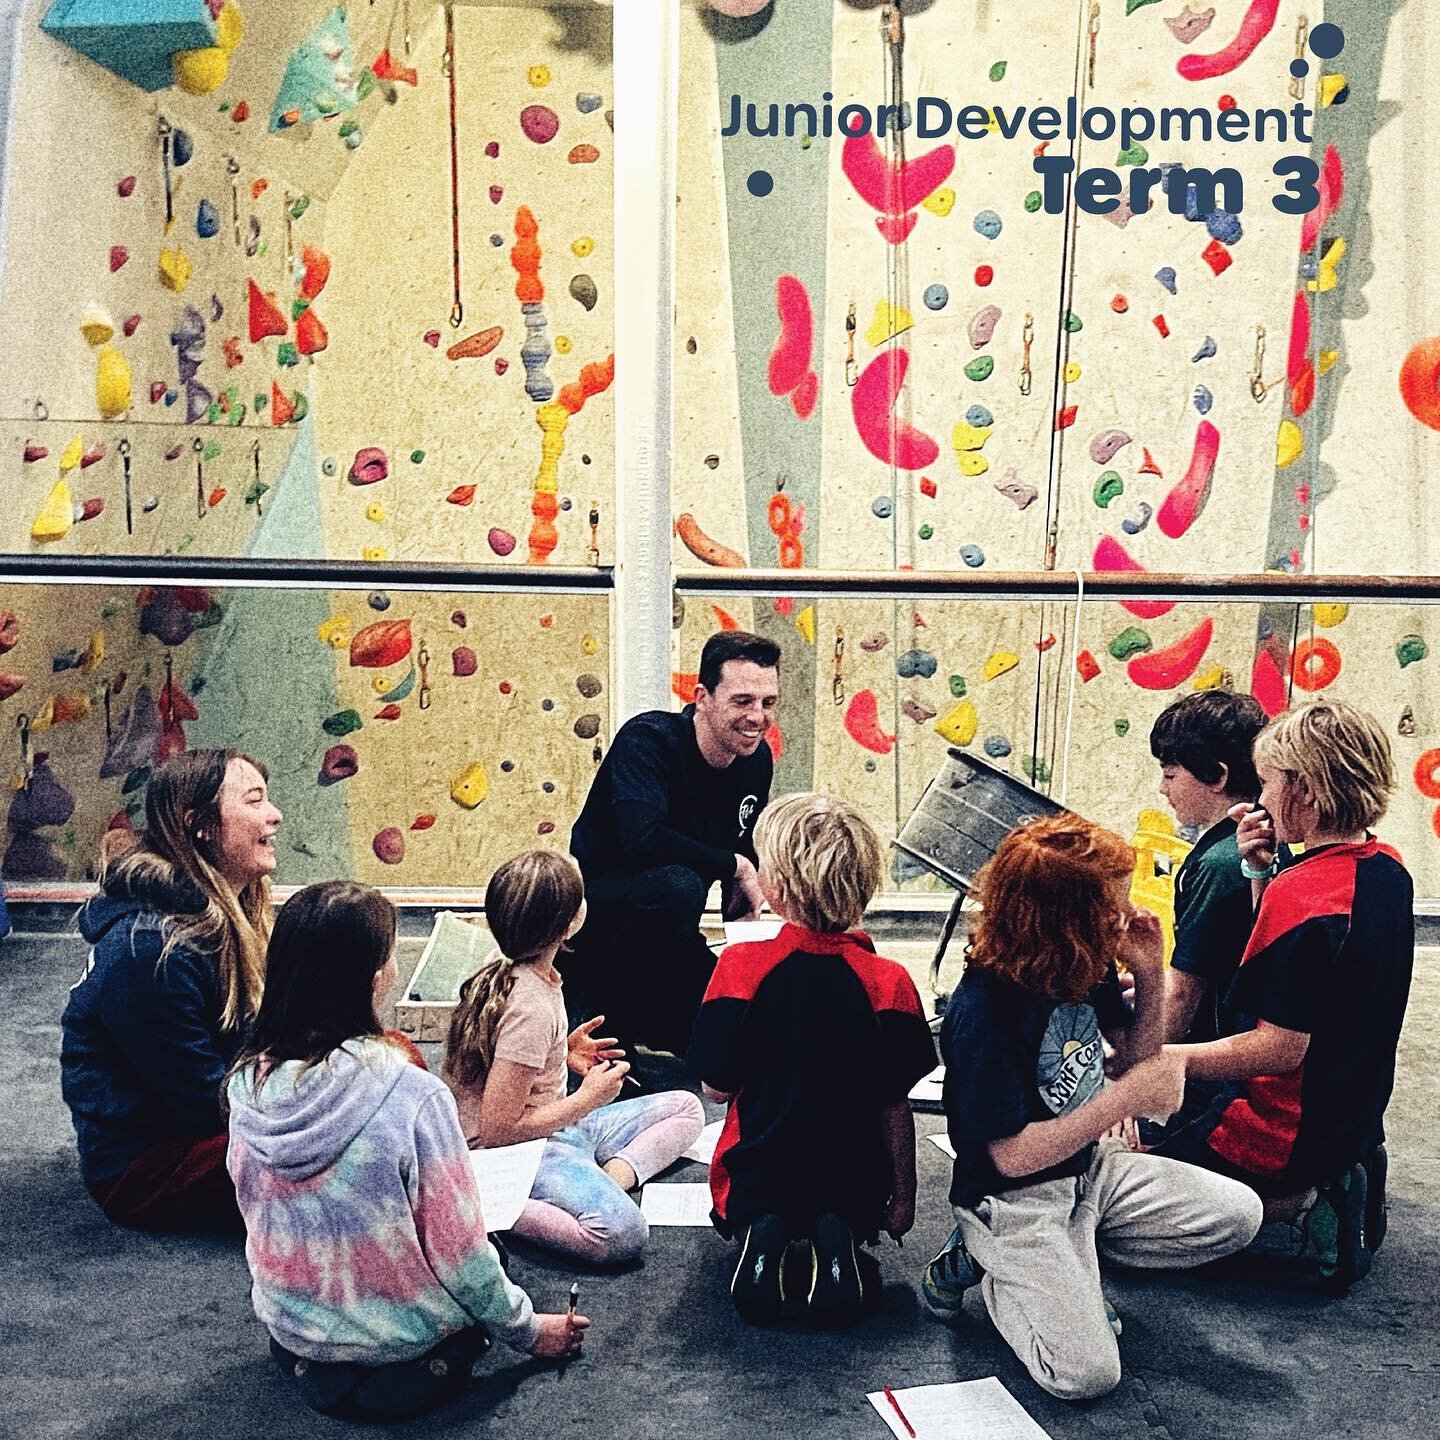 Rego for Term 3 Junior Development classes is now open ☺️🎯
-
For ages 5-18 and open for any skill-level&hellip; sign up to learn all things climbing from our amazing coaching team. 🤩
The class package includes a facility membership to come climbing